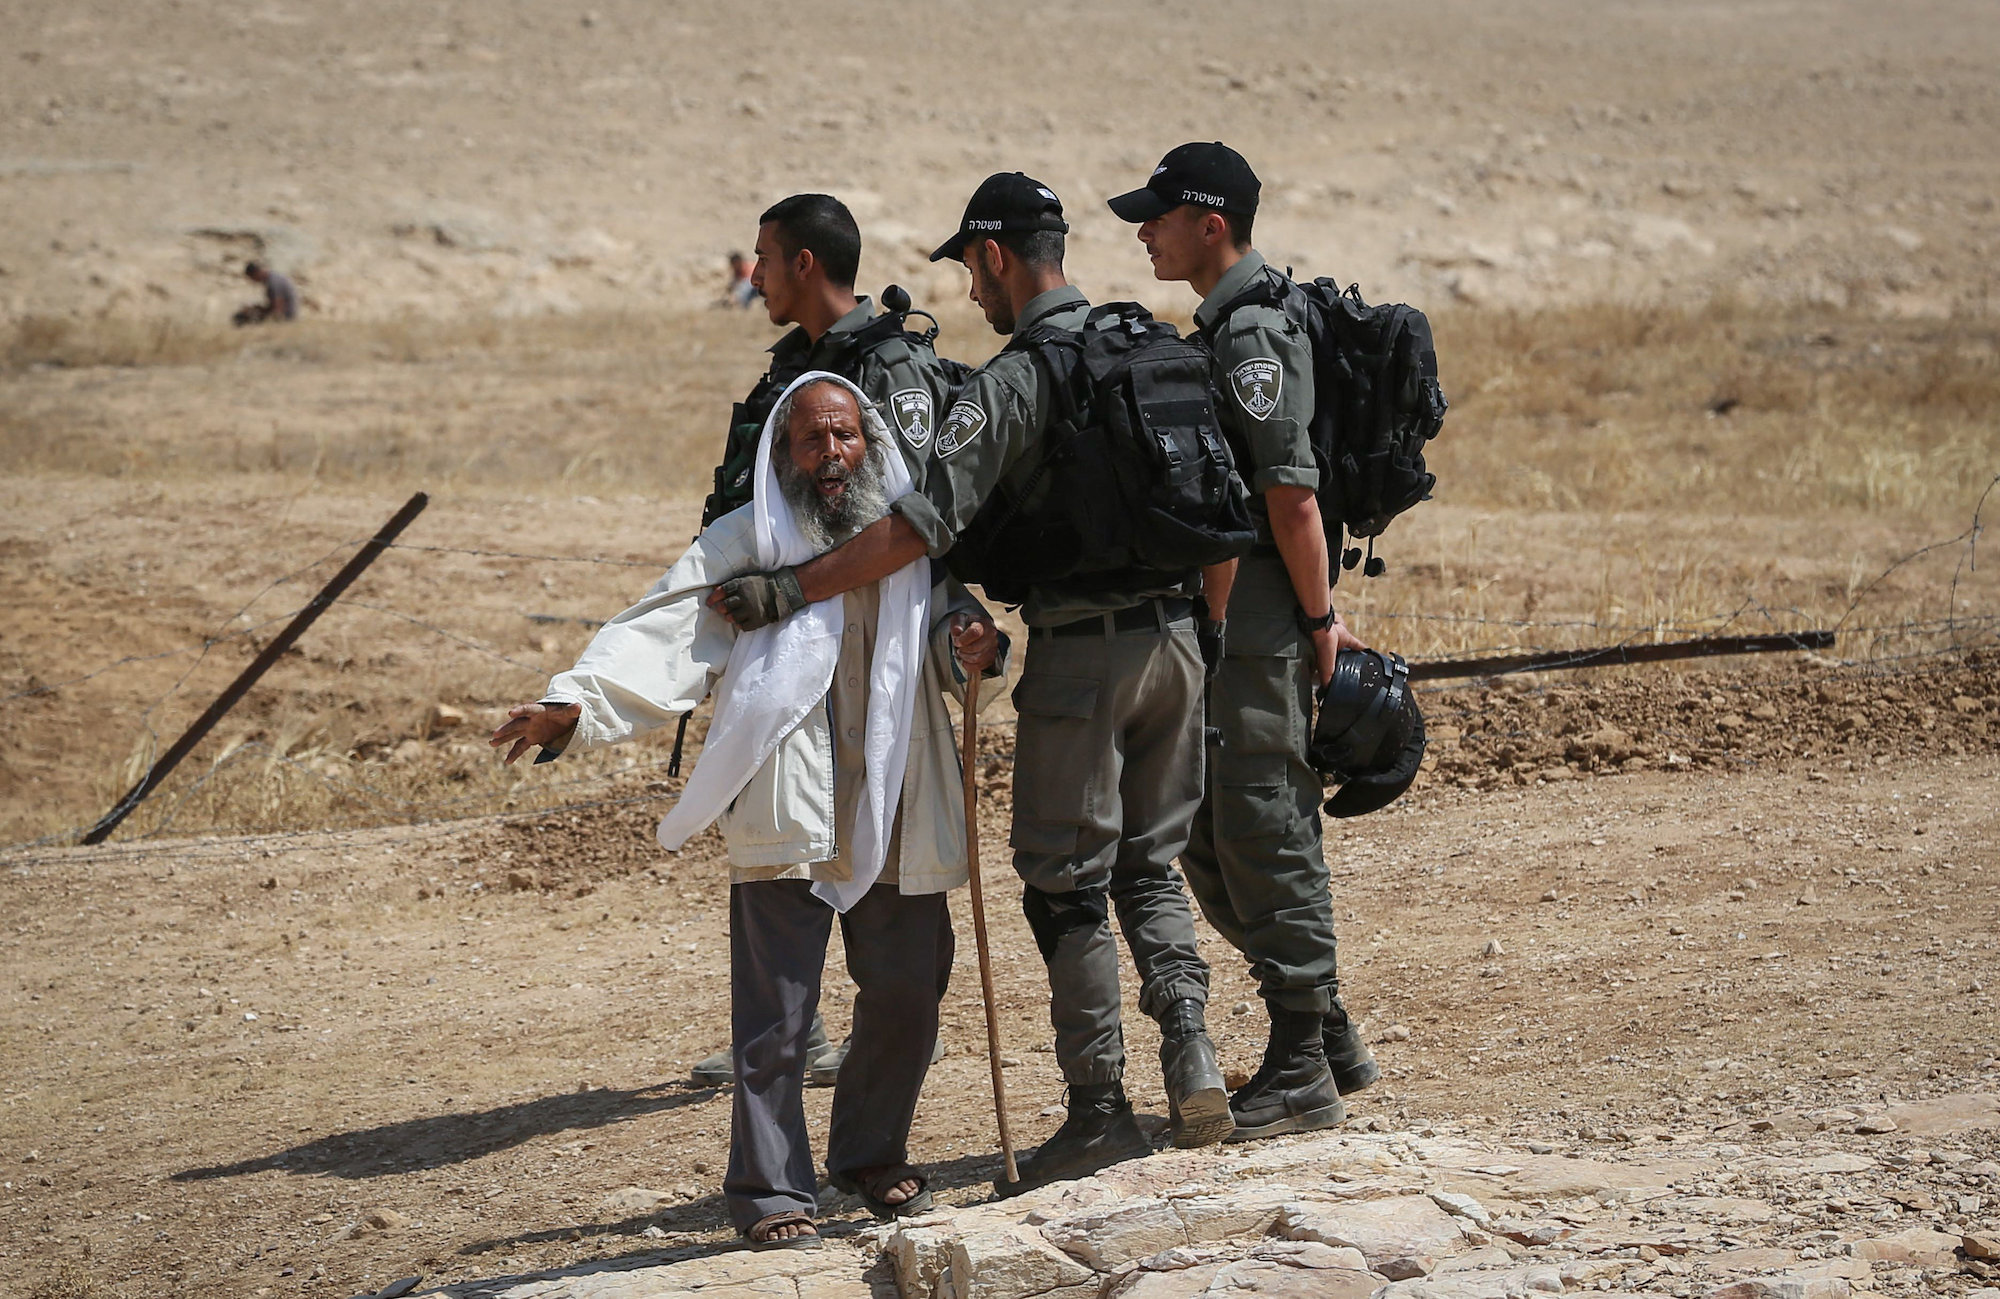 Israeli troops hold back a Palestinian man as they demolish sheds belonging to Palestinians in the South Hebron Hills, June 12, 2019. (Wisam Hashlamoun/Flash90)